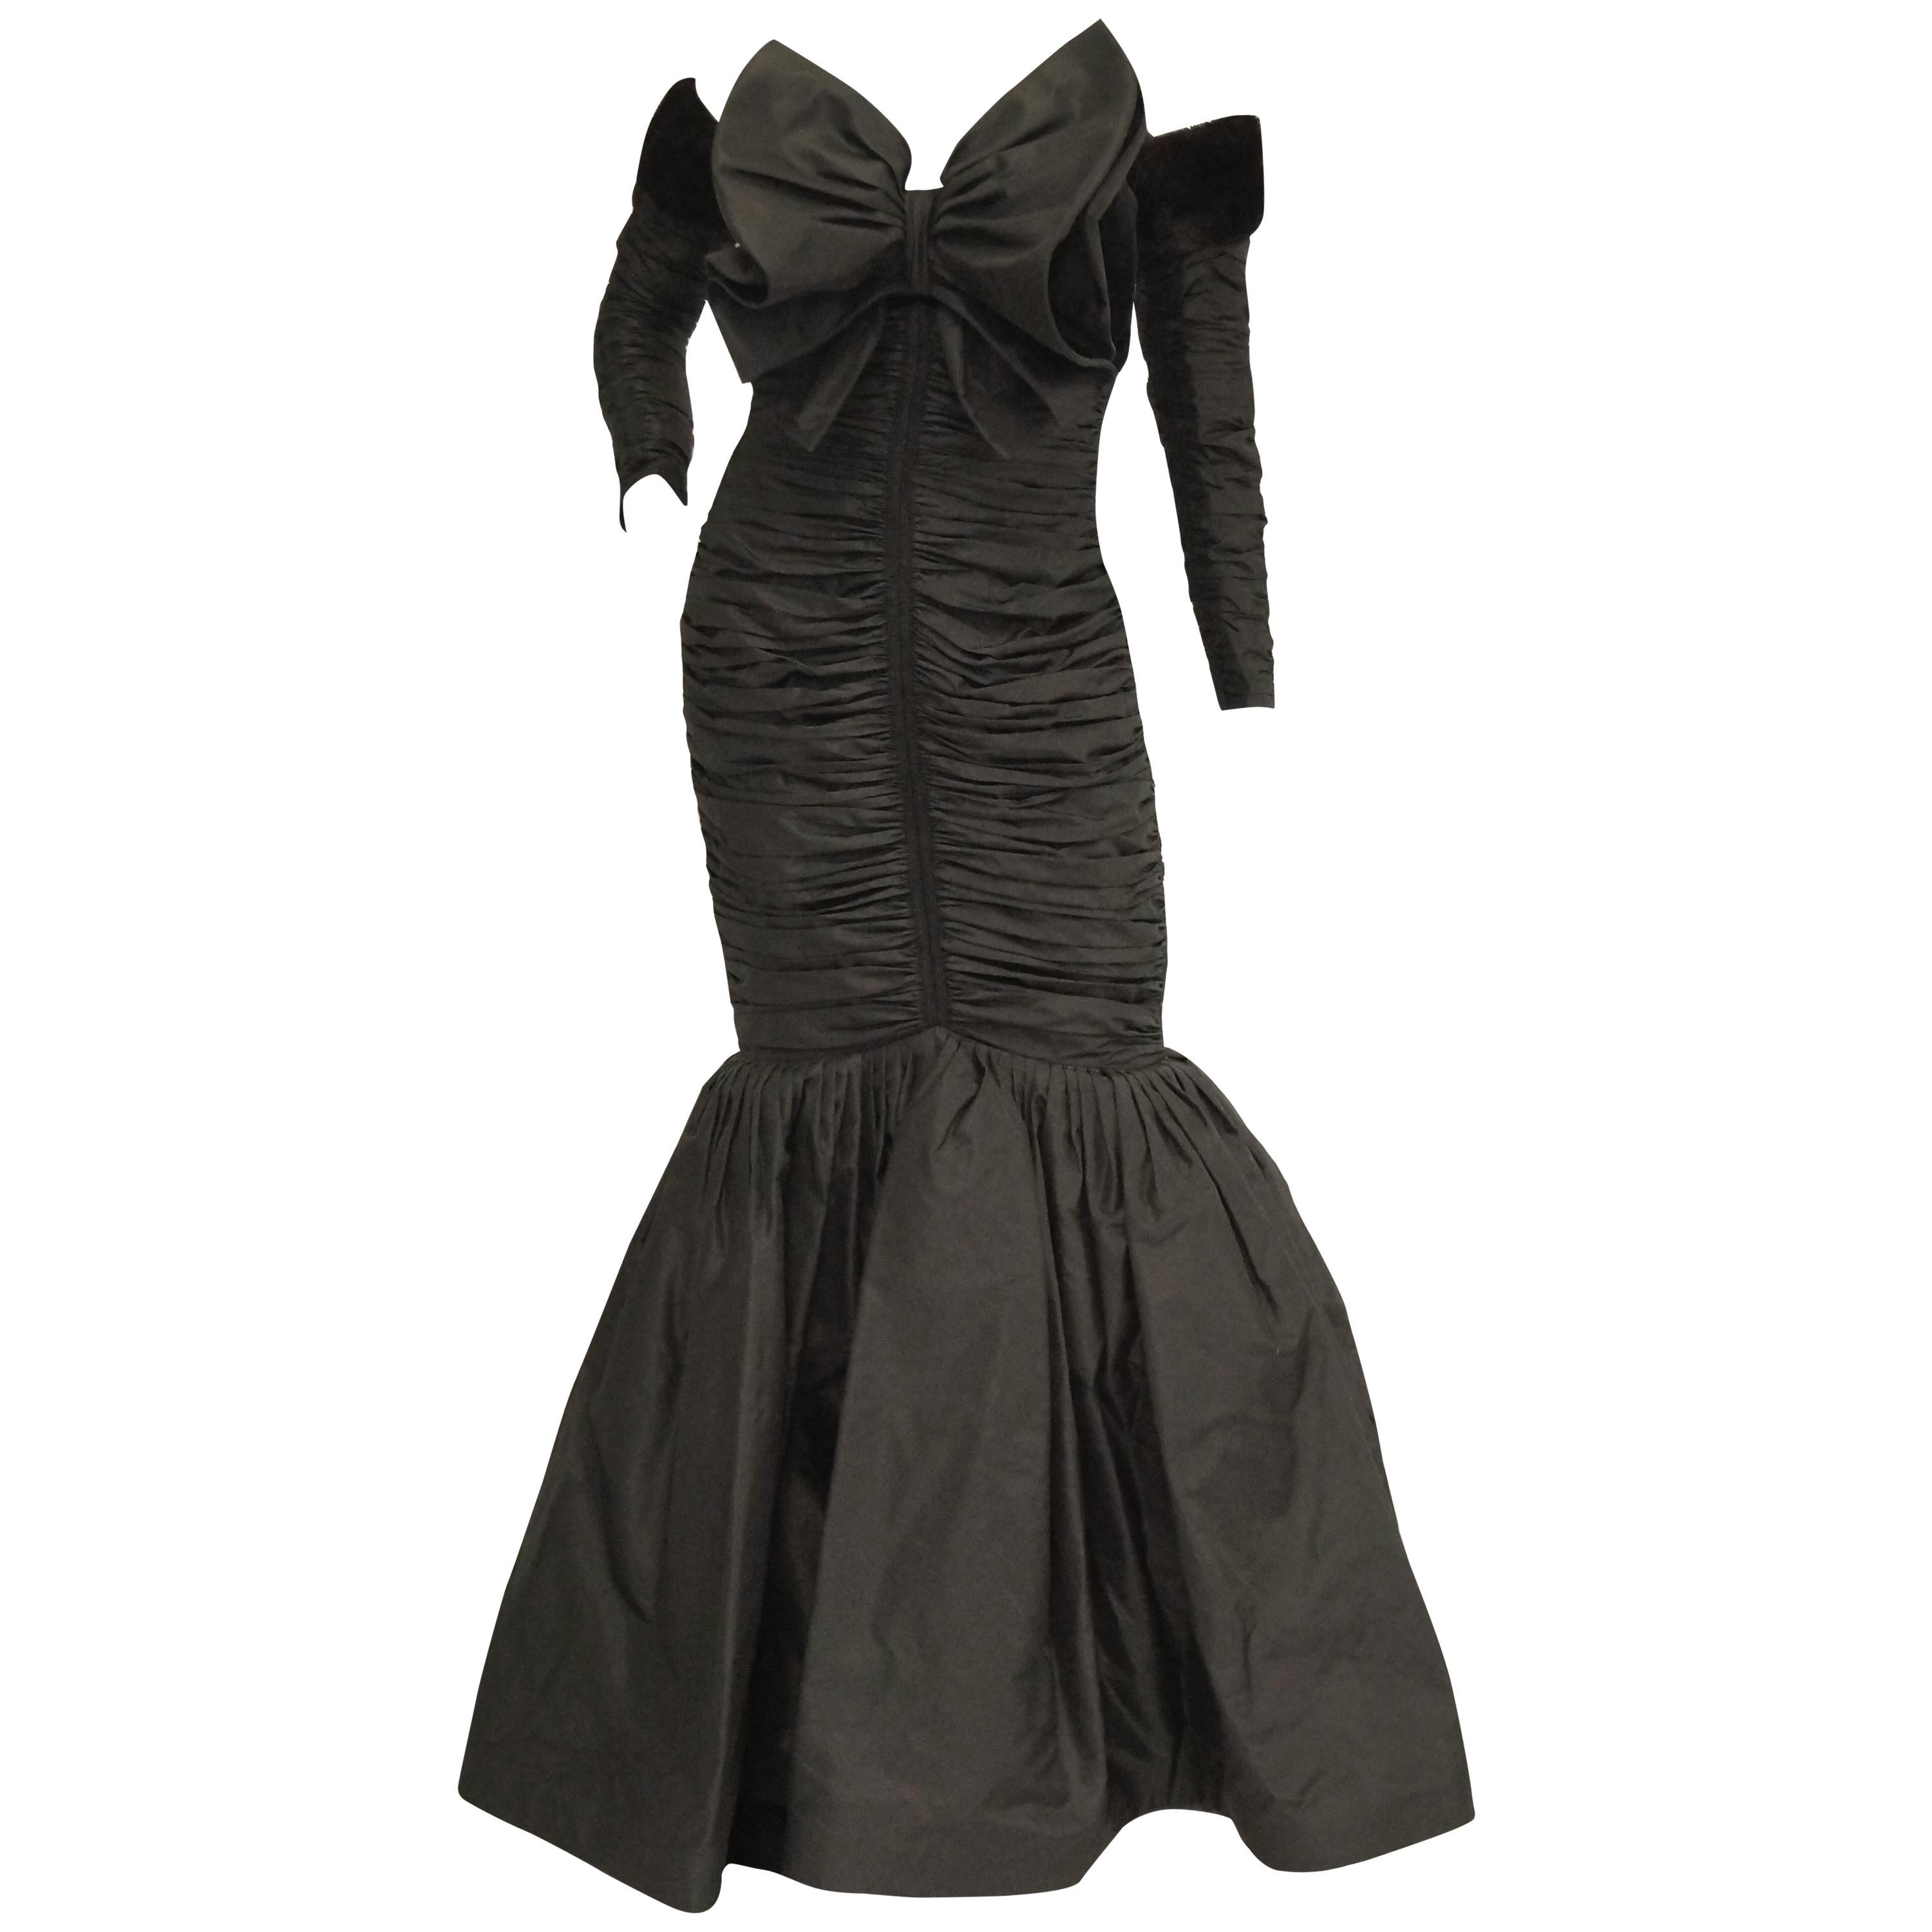  1980s Nina Ricci Couture Strapless Black Evening Dress  For Sale